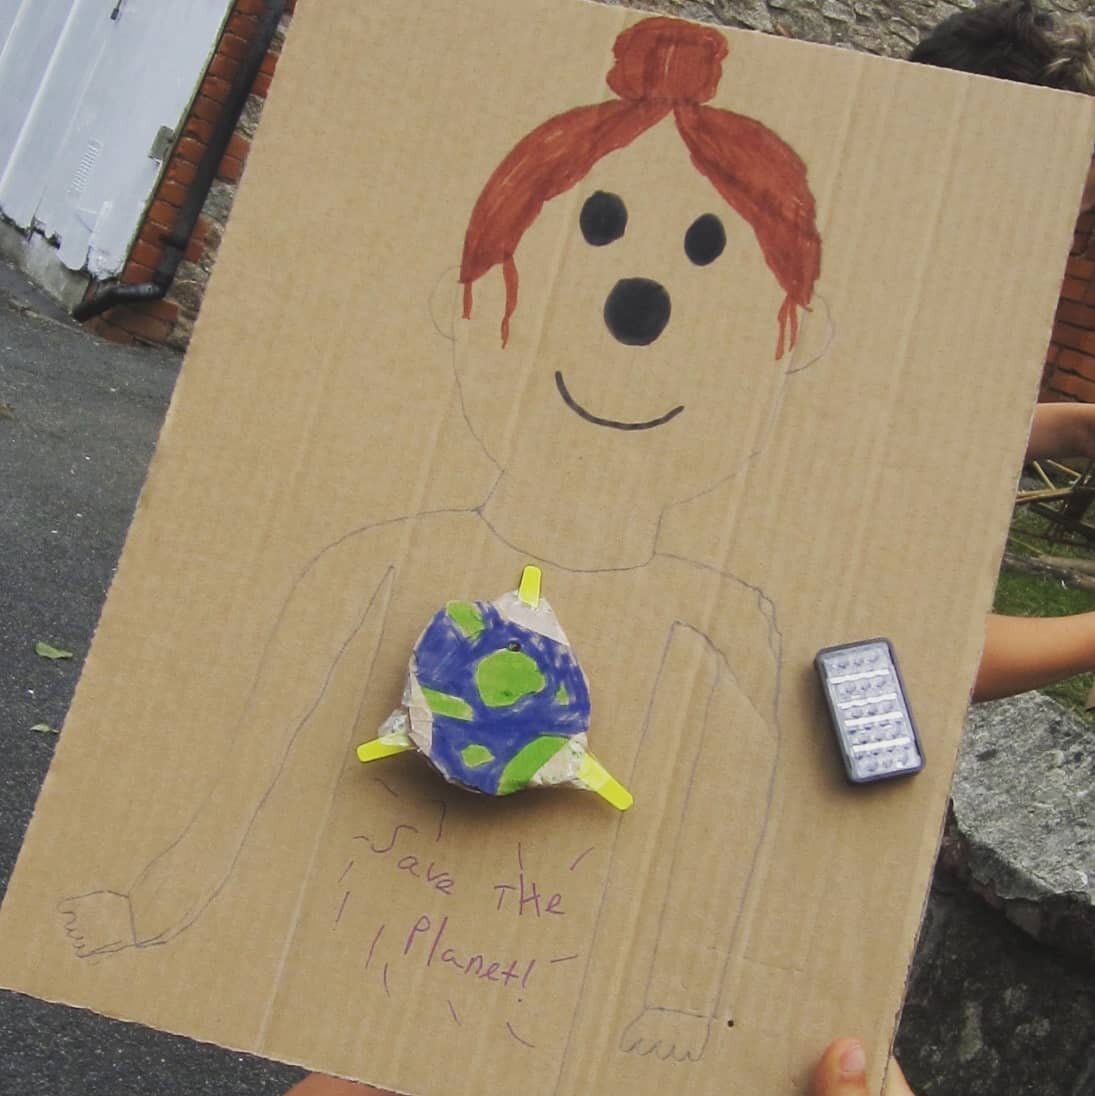 How fantastic are these solar powered toys! 

We have been providing resources to schools throughout lockdown in the UK. Here are some solar toys made from junk modelling. A very simple circuit made of a solar panel, motor and blades. 

#solartoy #ju